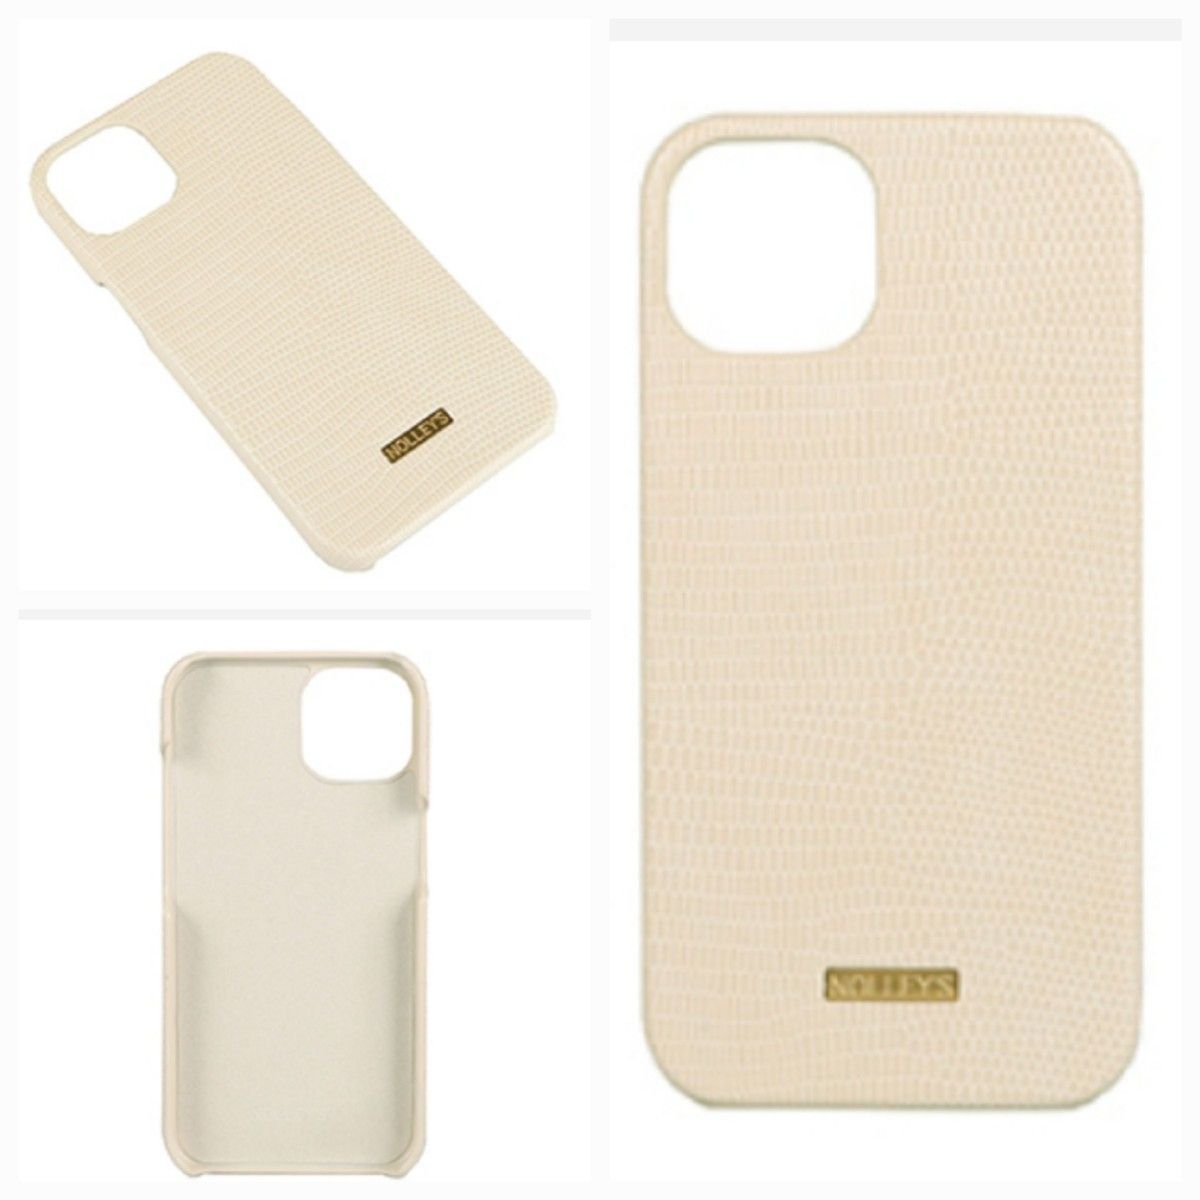 NOLLEY'S Croco Style Leather SHELL CASE for iPhone 13 カバー　ノーリーズ　